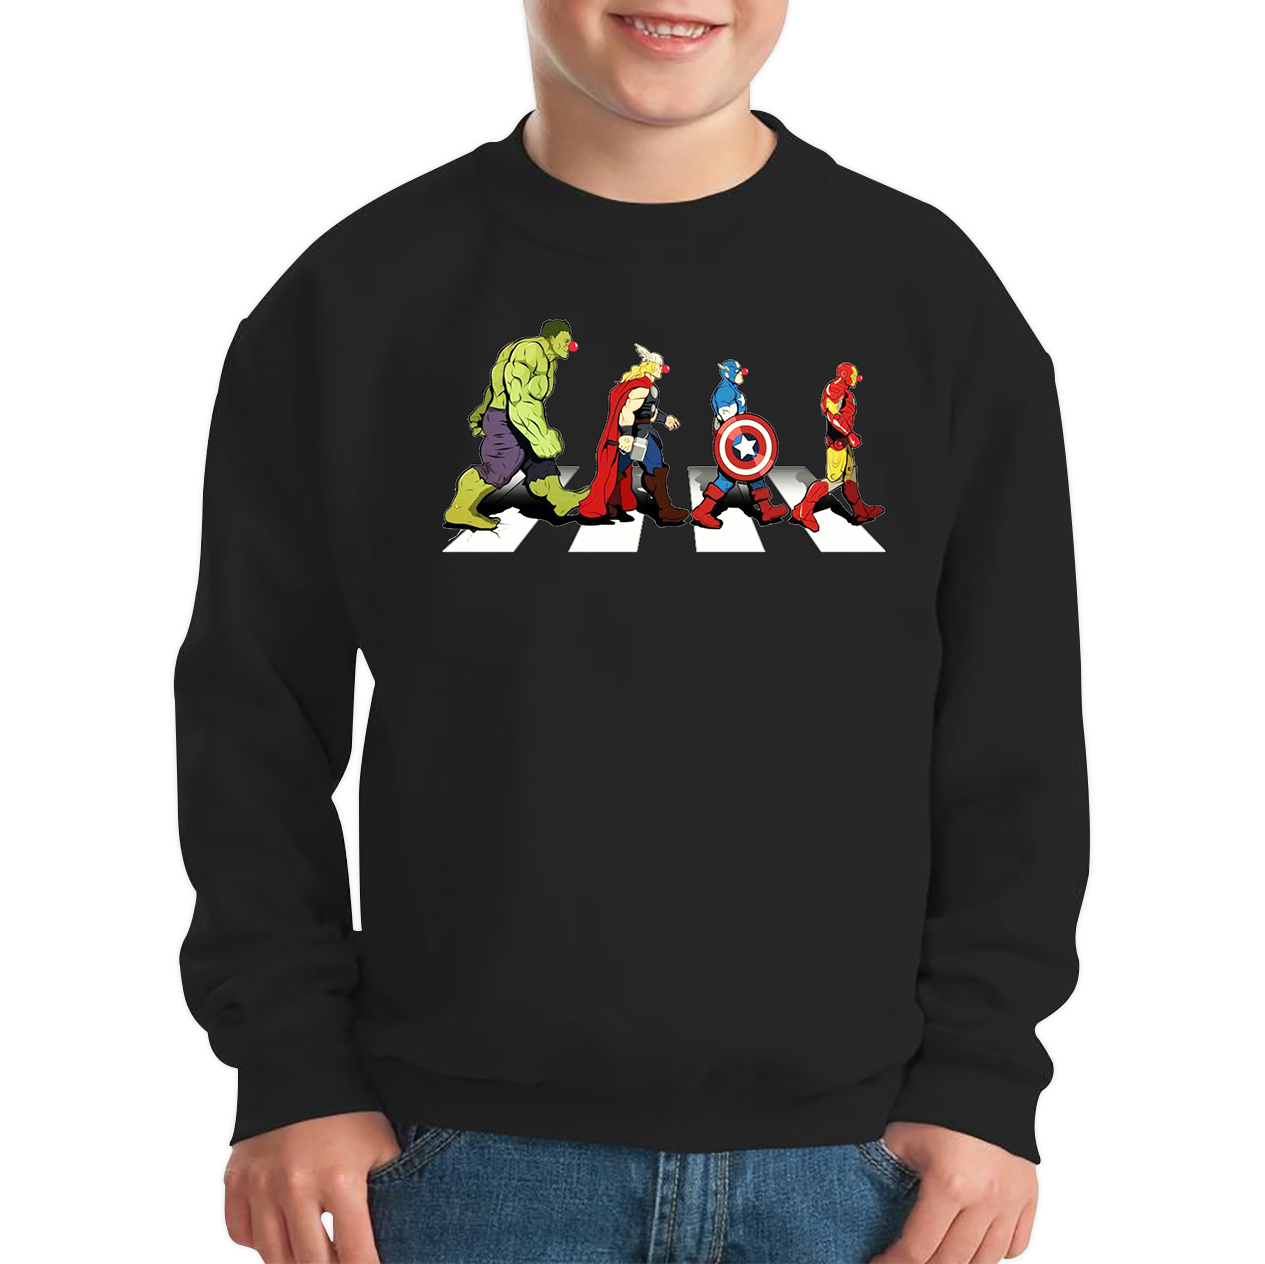 Hulk Thor Captain America Iron Man Marvel Avengers Abbey Road Red Nose Day Kids Sweatshirt. 50% Goes To Charity